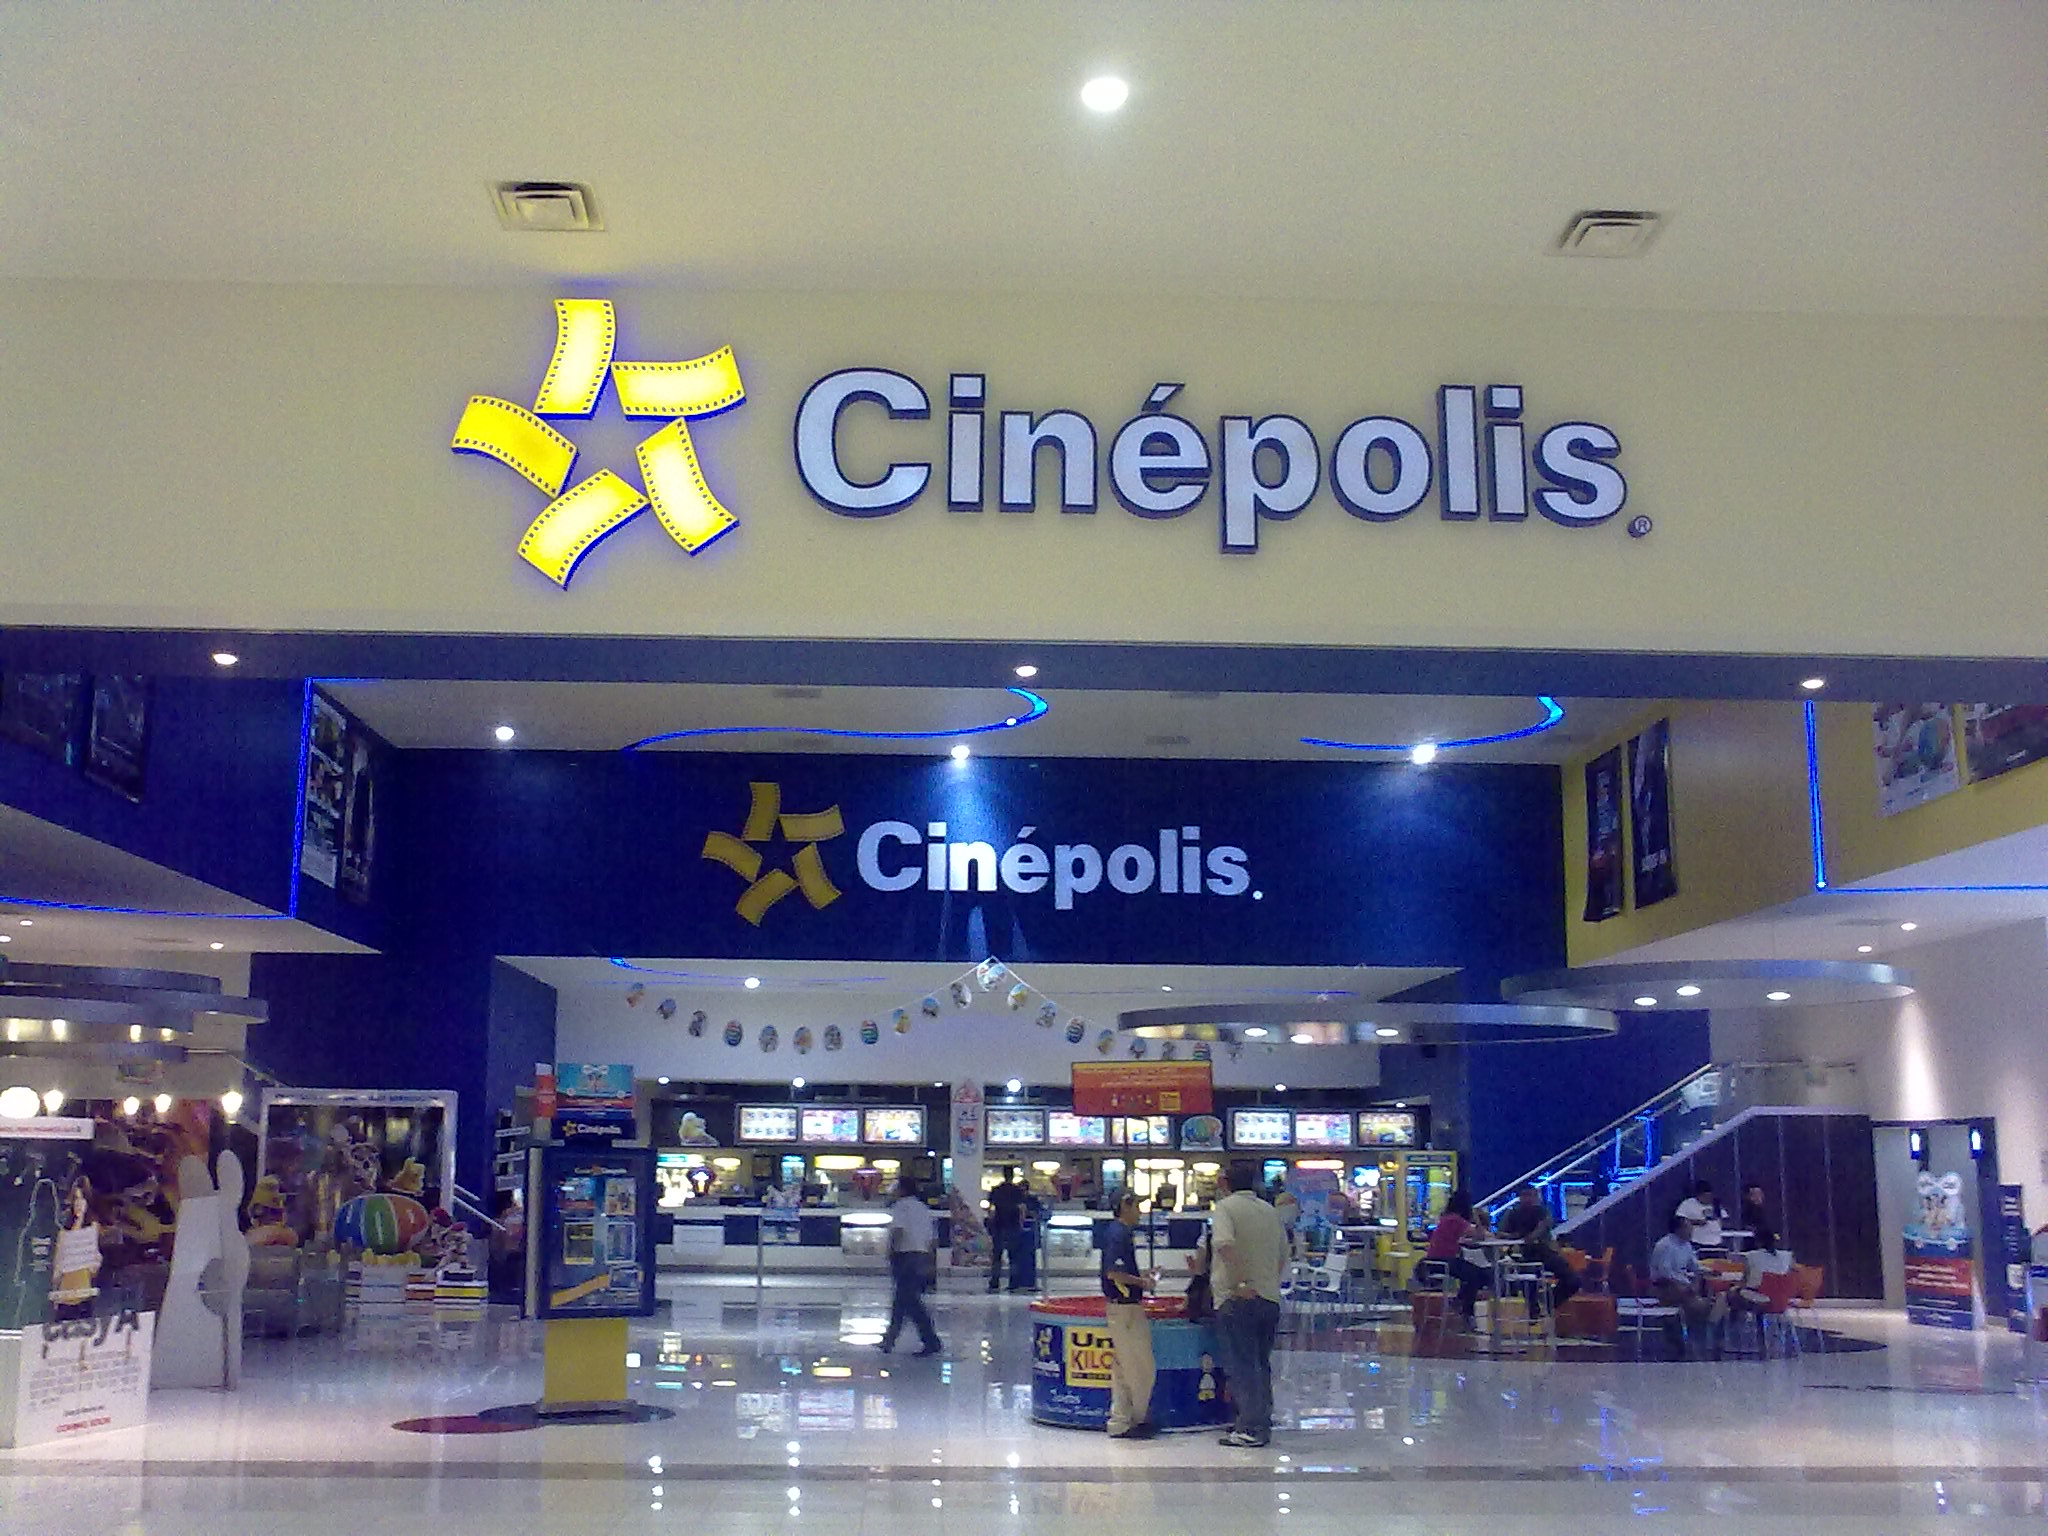 Cinepolis planning 600 movie screens in India by 2022, says Asia director